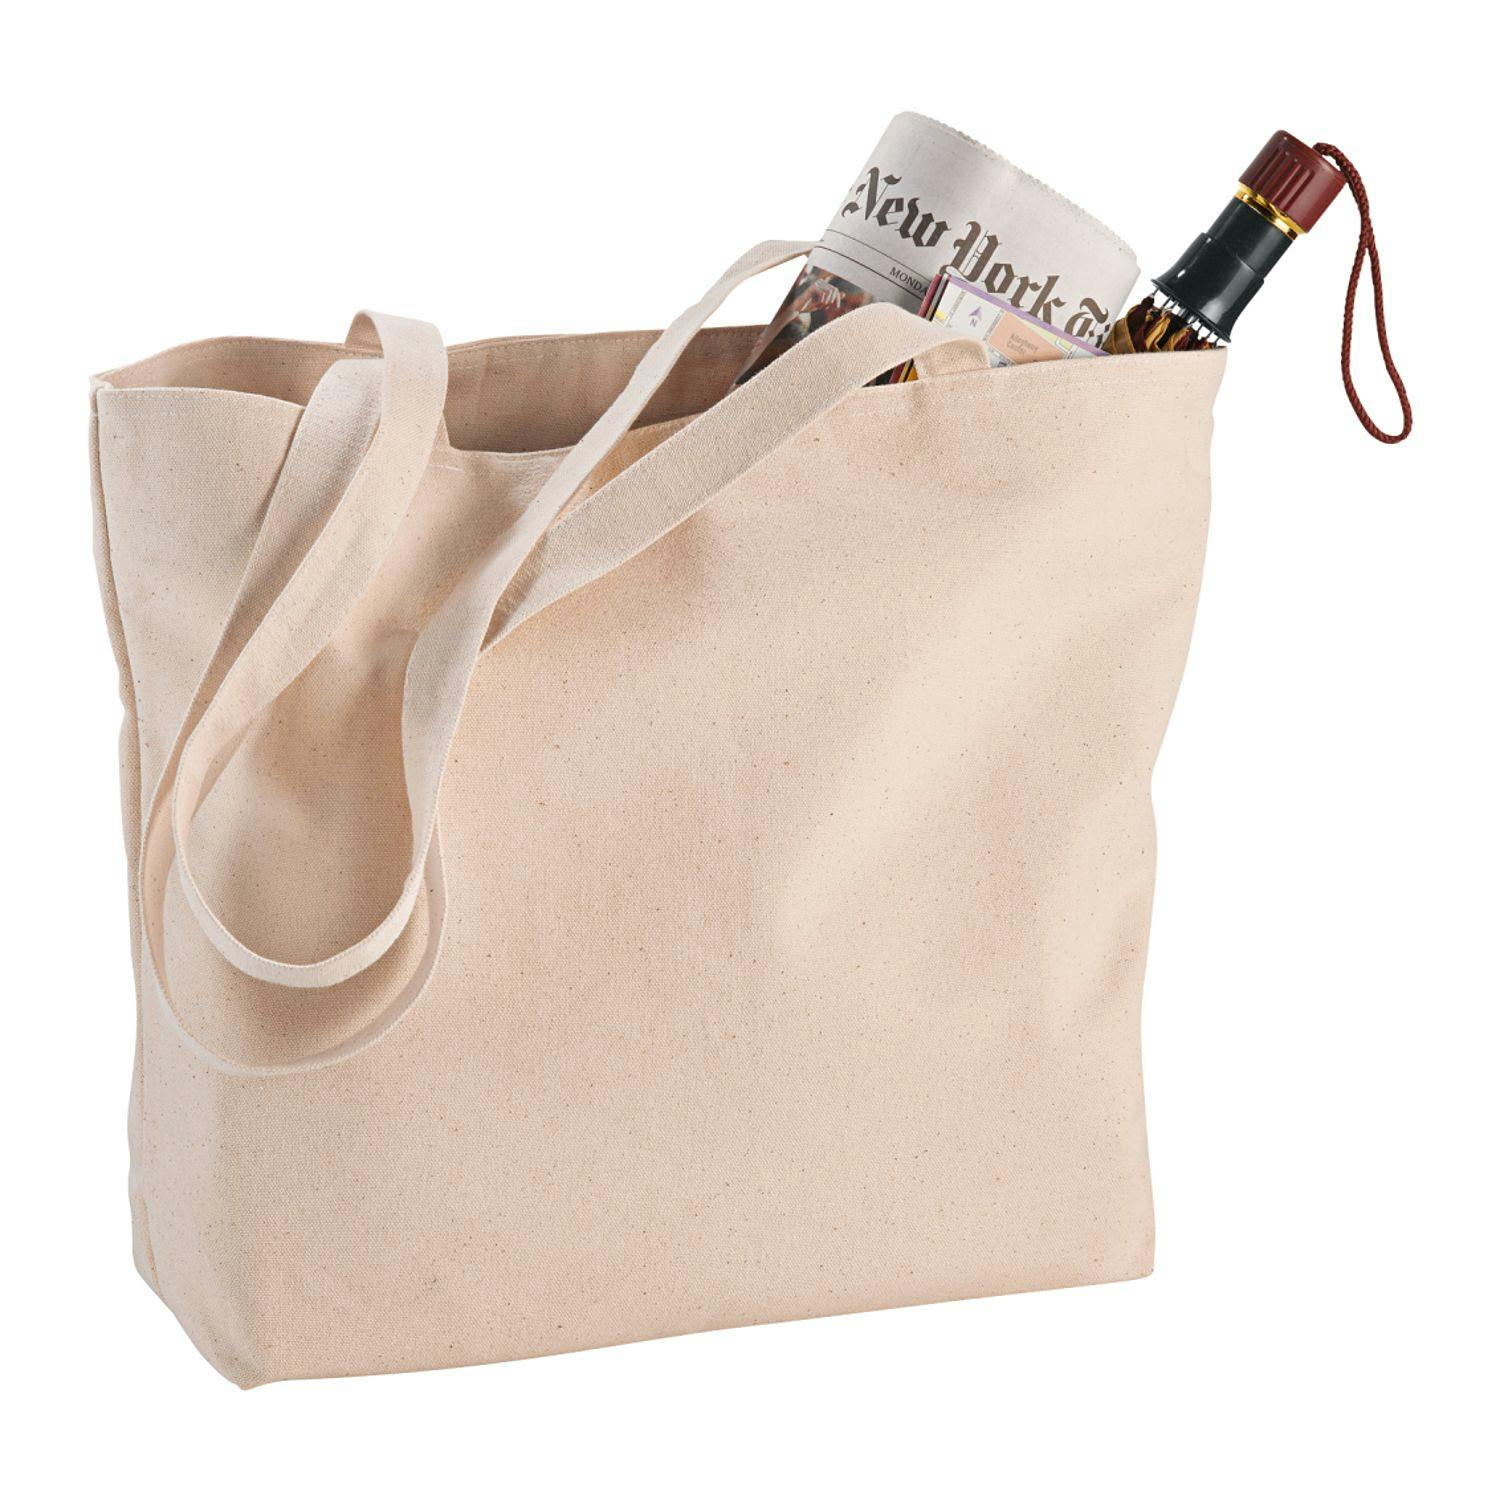 Zippered 12oz Cotton Canvas Shopper Tote - additional Image 1